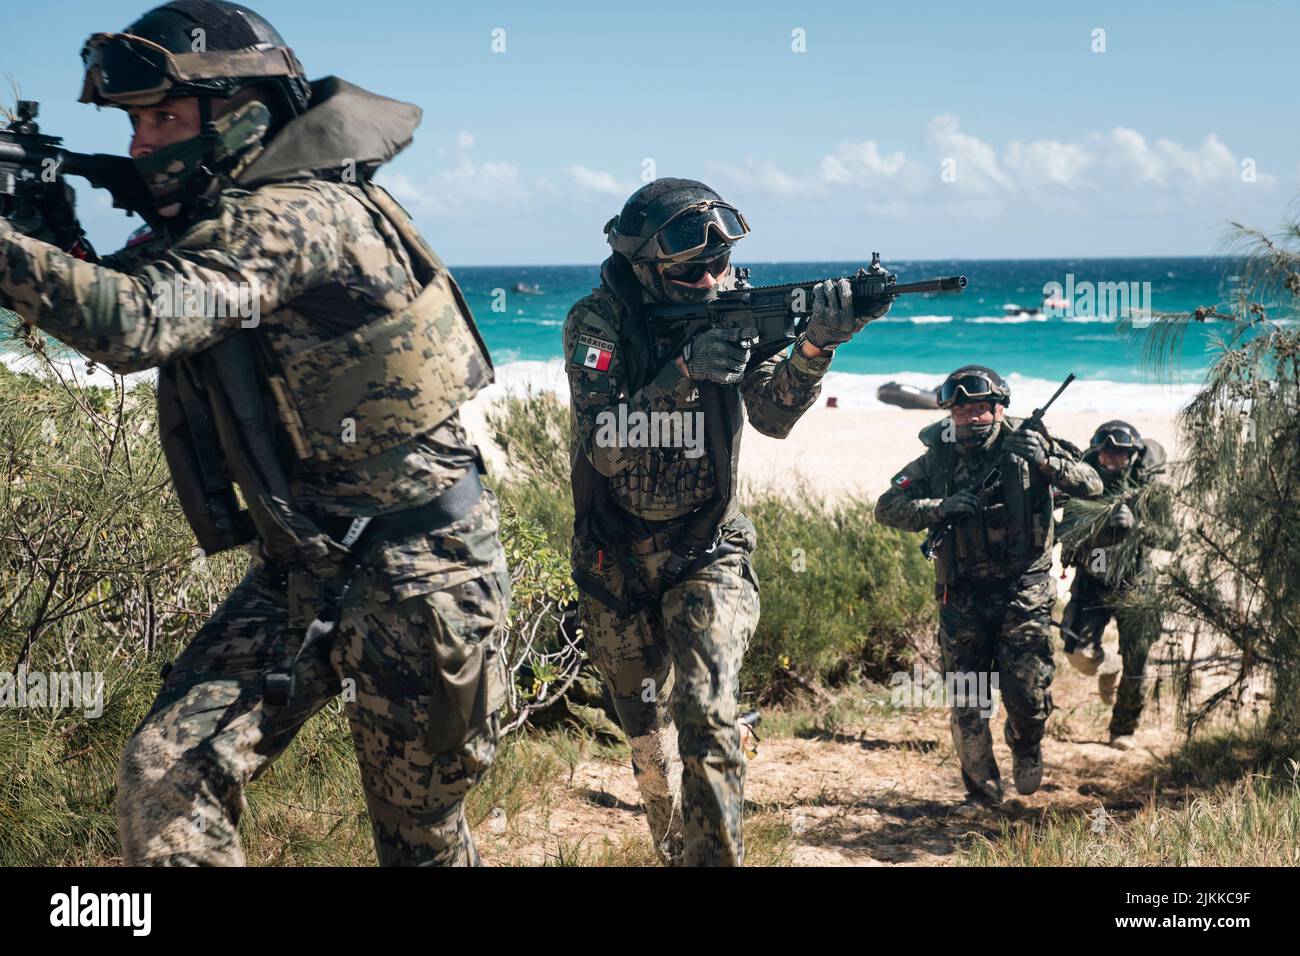 Kaneohe Bay, United States. 01 August, 2022. Mexican Naval Infantry Marines storm the beach after arriving on combat rubber raiding craft during multinational littoral operations as part of the Rim of the Pacific at Marine Corps Base Hawaii, August 1, 2022 in Kaneohe Bay, Hawaii. Credit: Cpl. Dillon Anderson/NZ Armed Forces/Alamy Live News Stock Photo